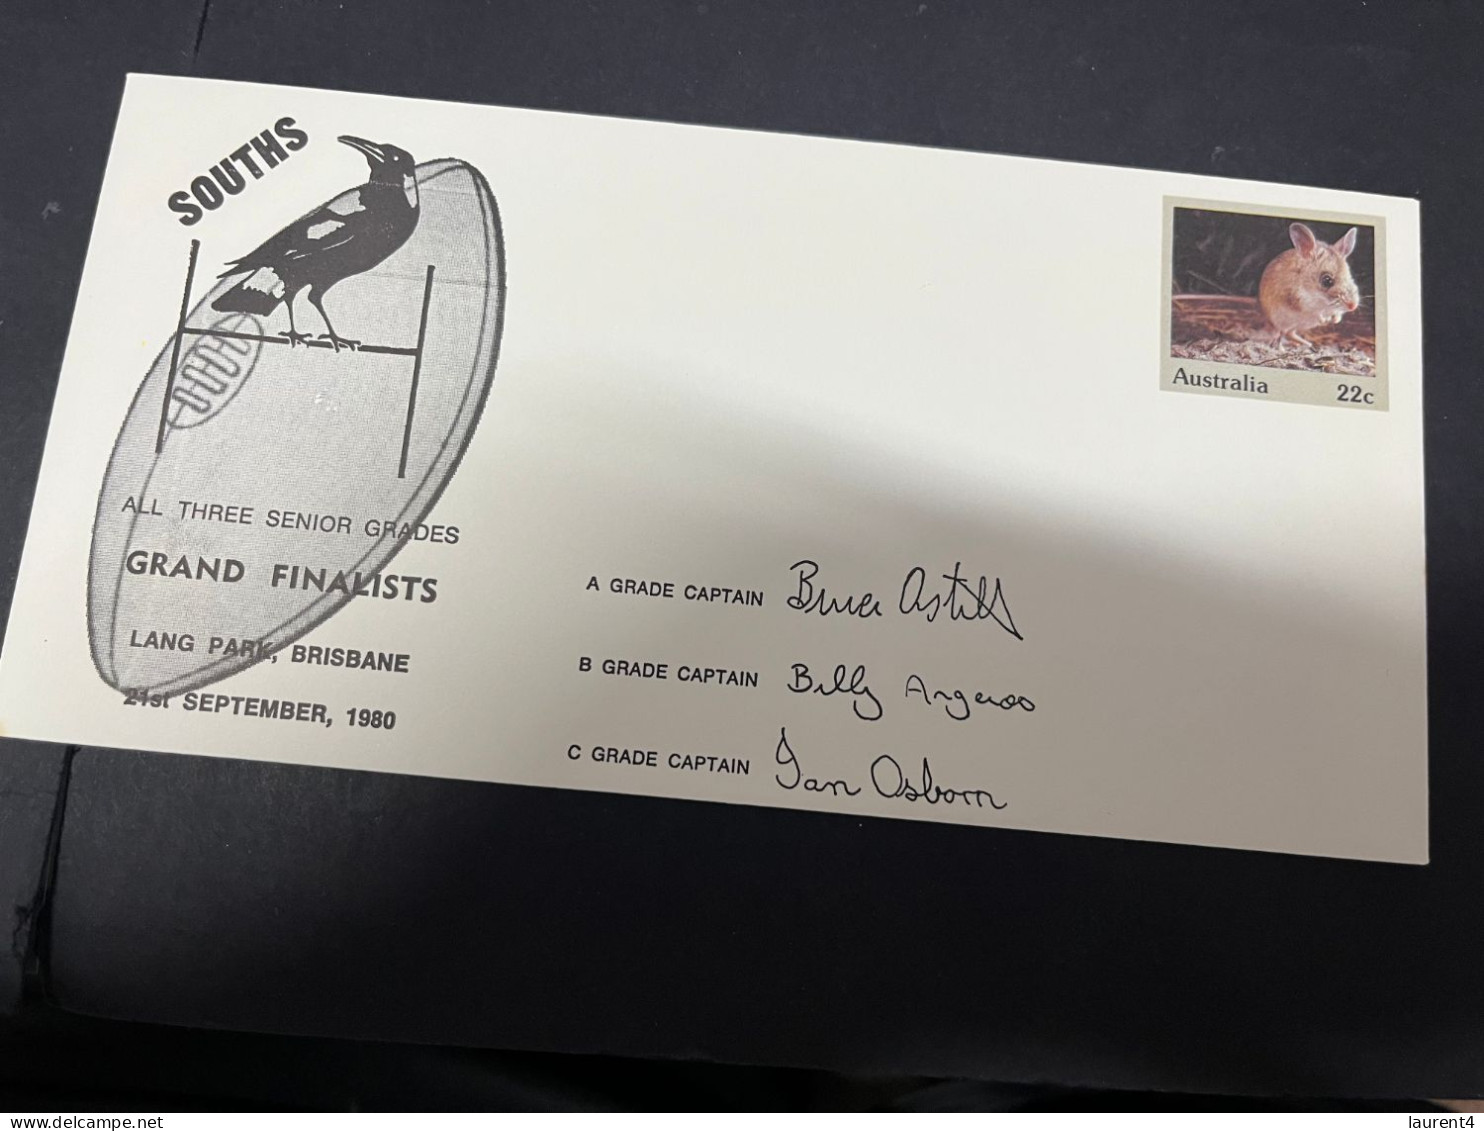 30-4-2023 (3 Z 29) Australia FDC (1 Covers) 1980 - OZ Football - South (magpies) Grand Finalists (signed - Hoping Mouse) - FDC